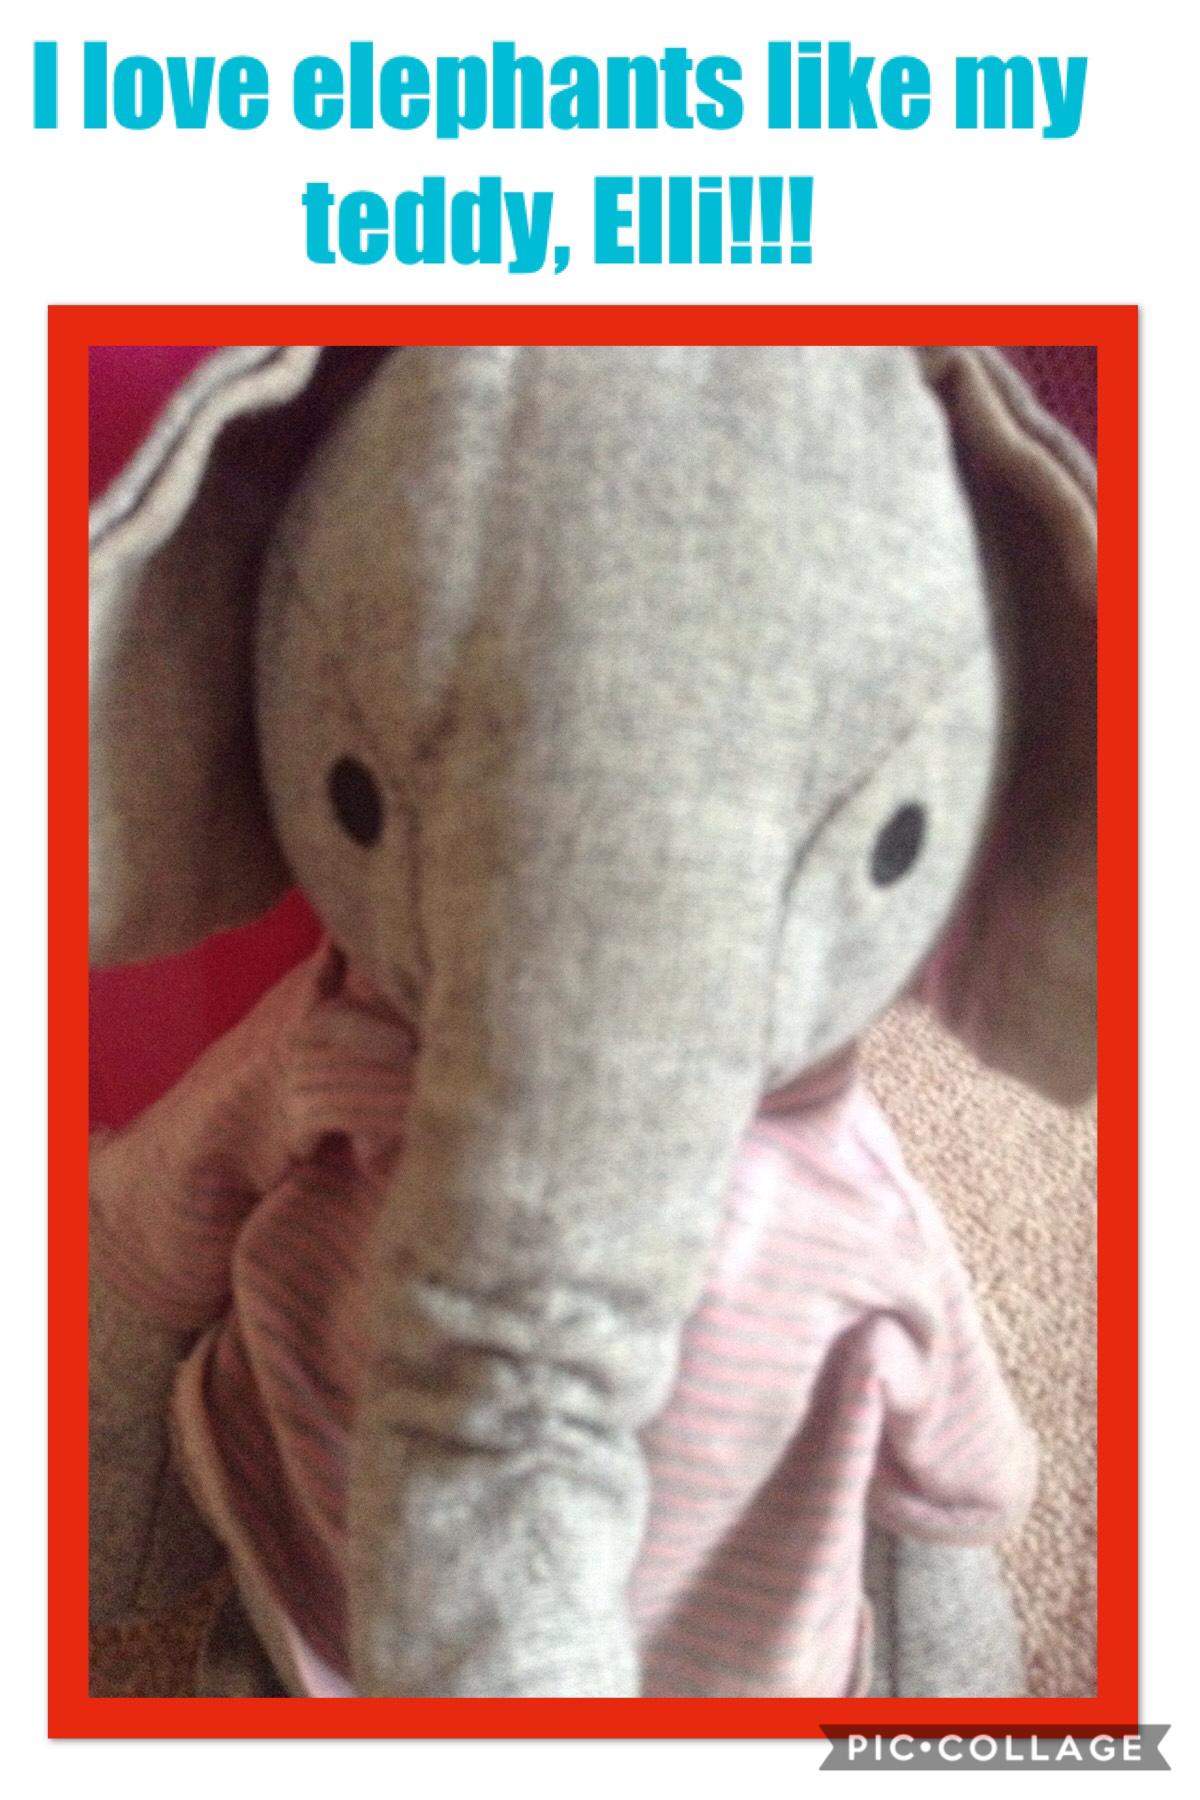 Elli is an elephant I love her. I got her when I was a baby👶🐘🐘